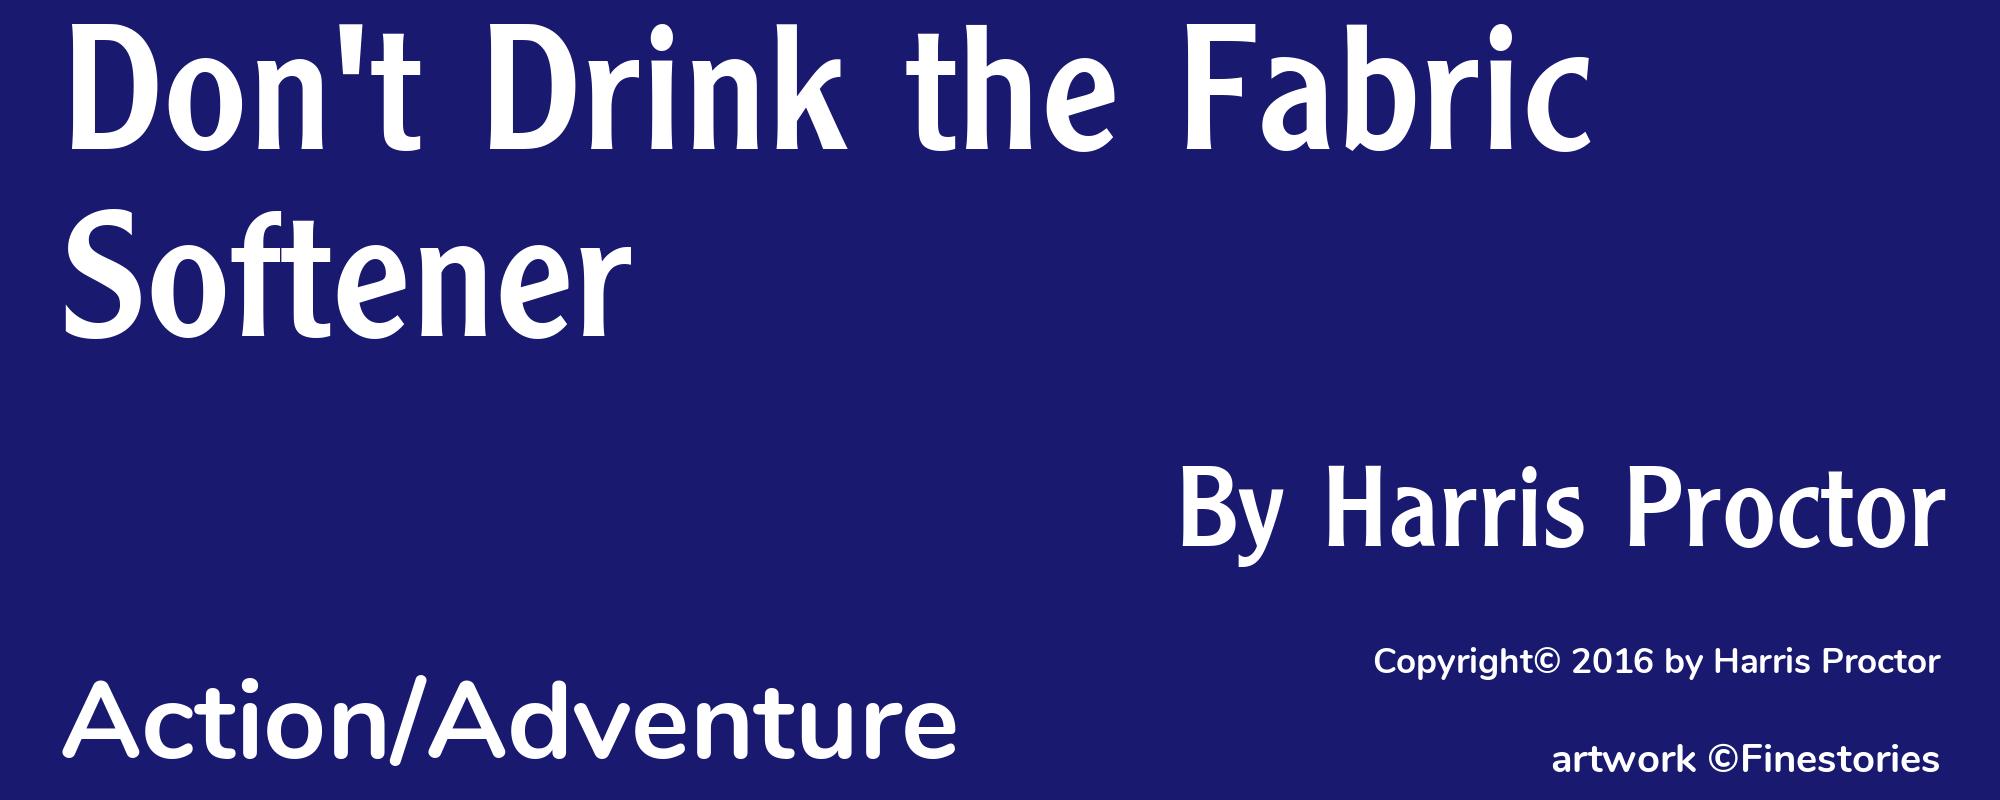 Don't Drink the Fabric Softener - Cover